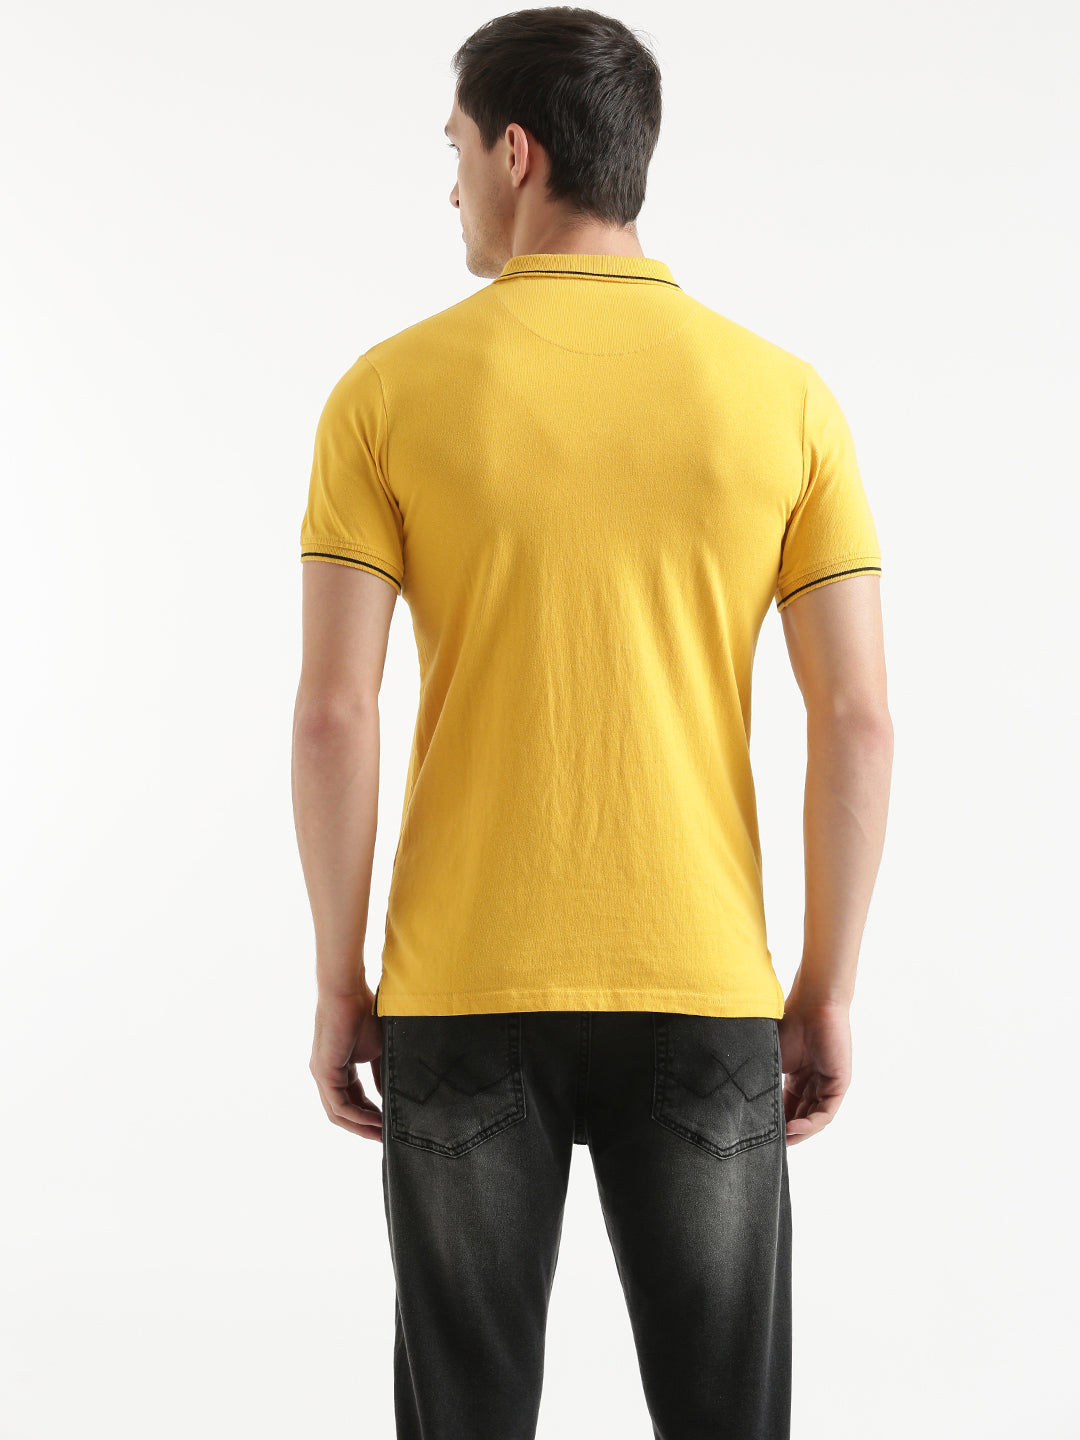 Just Perfect Blocked Polo T-Shirt